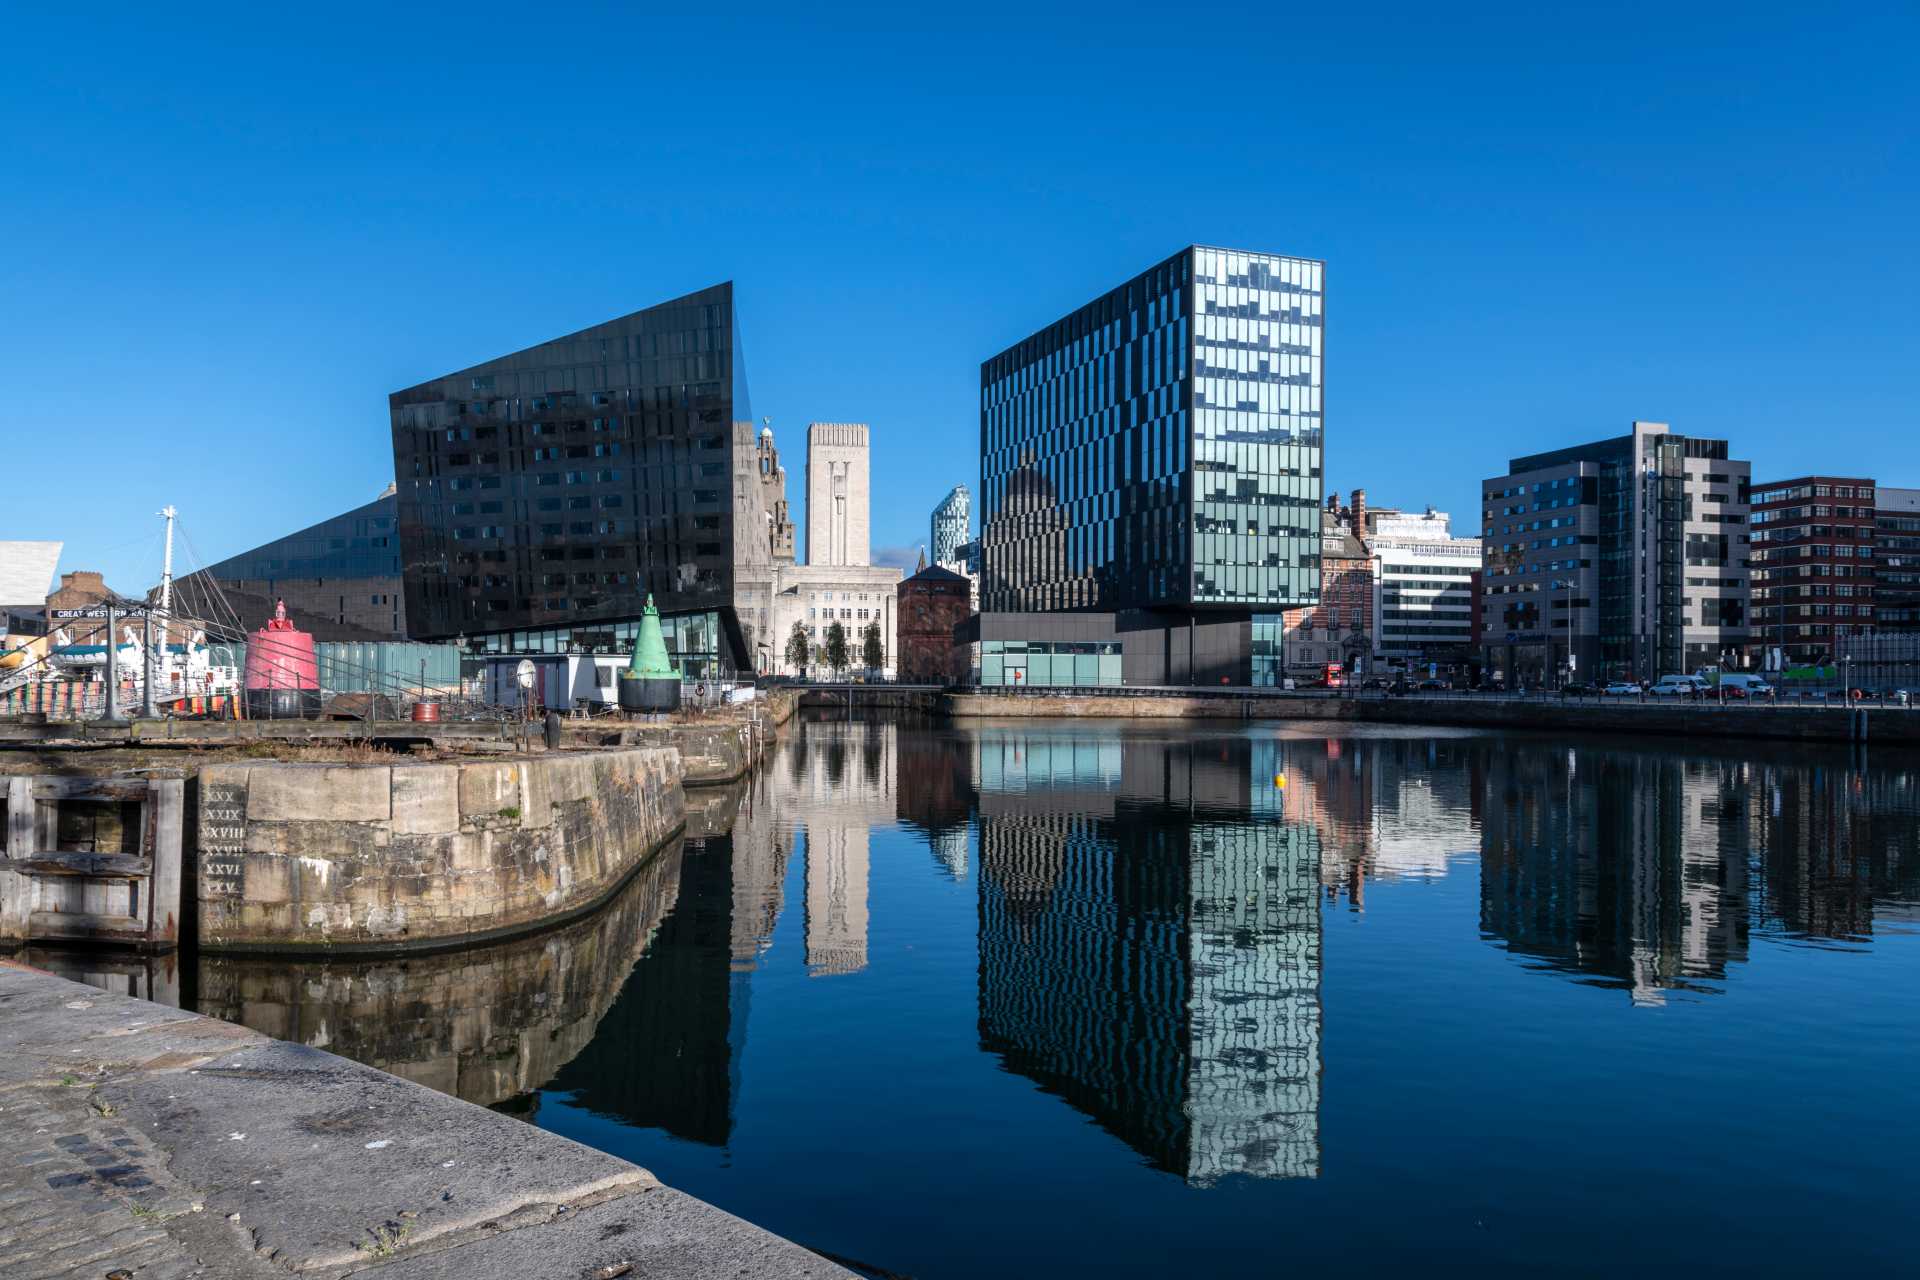 A view of the the Liverpool waterfront on a sunny day from the Albert Dock.